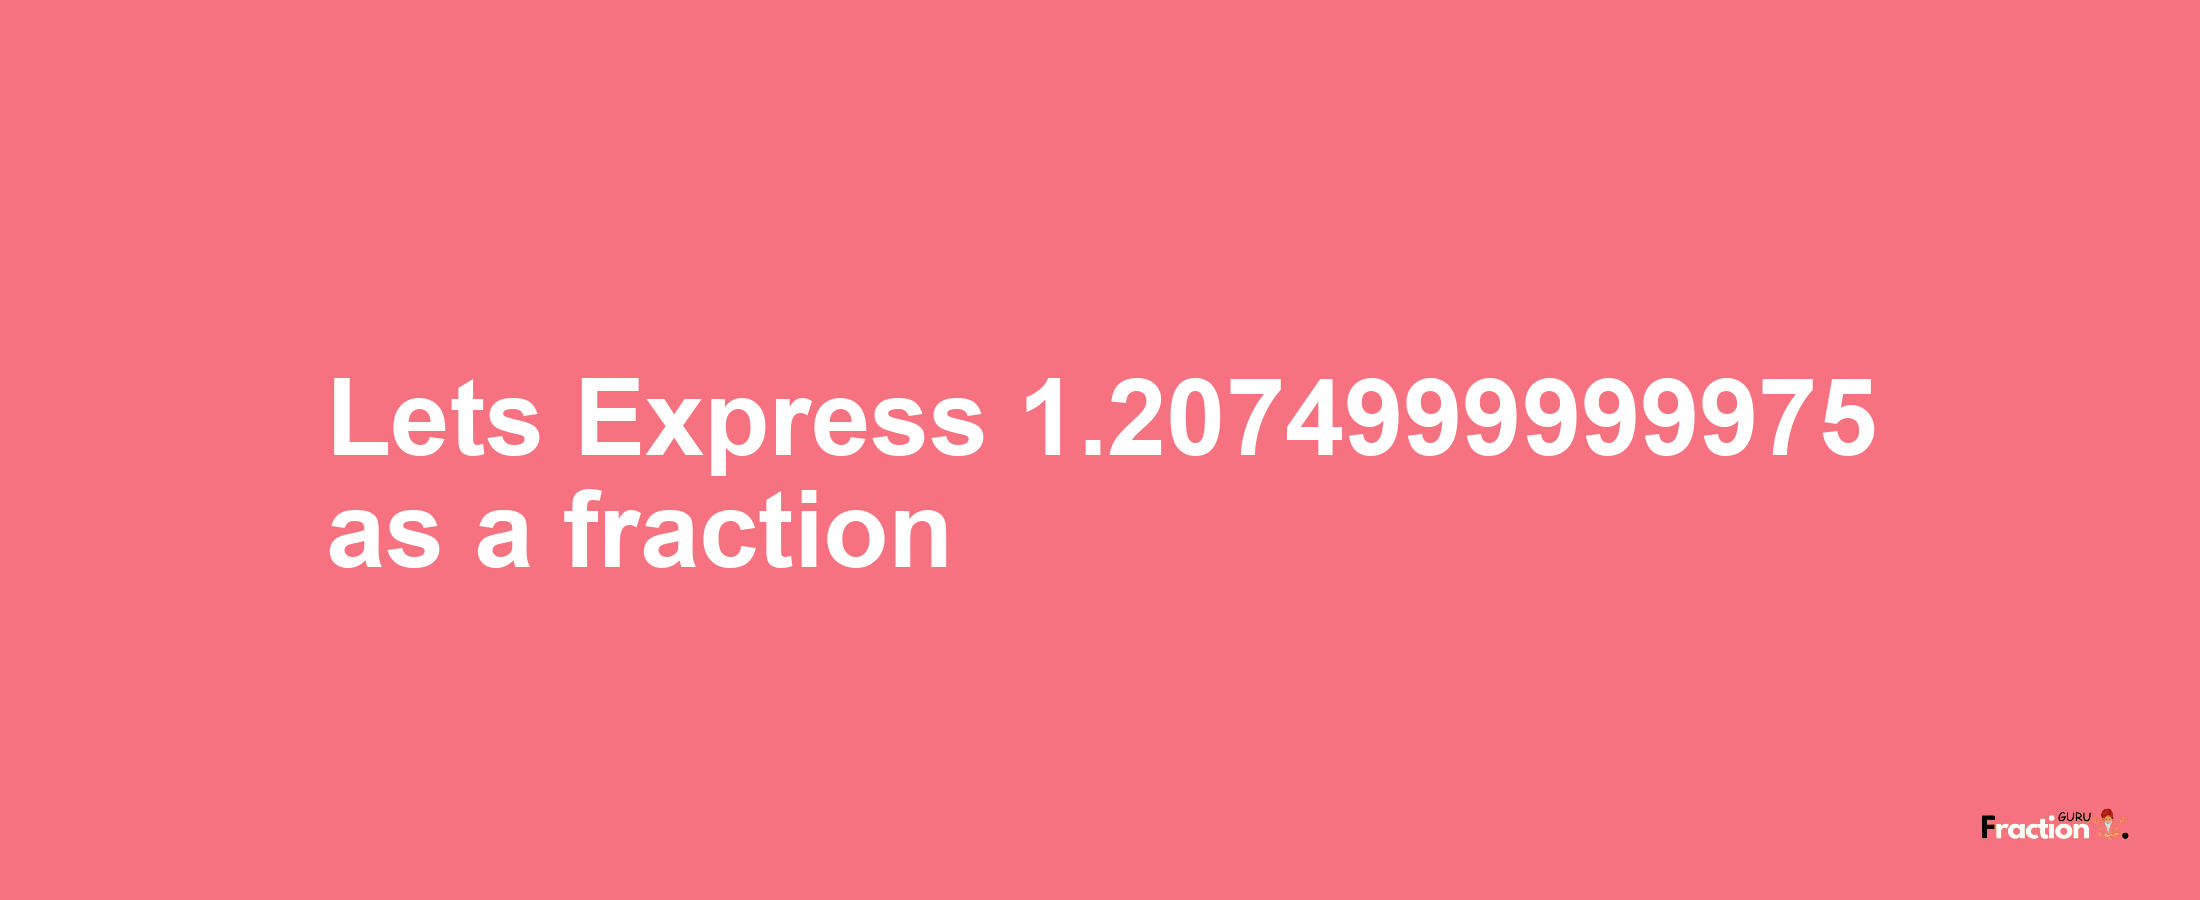 Lets Express 1.2074999999975 as afraction